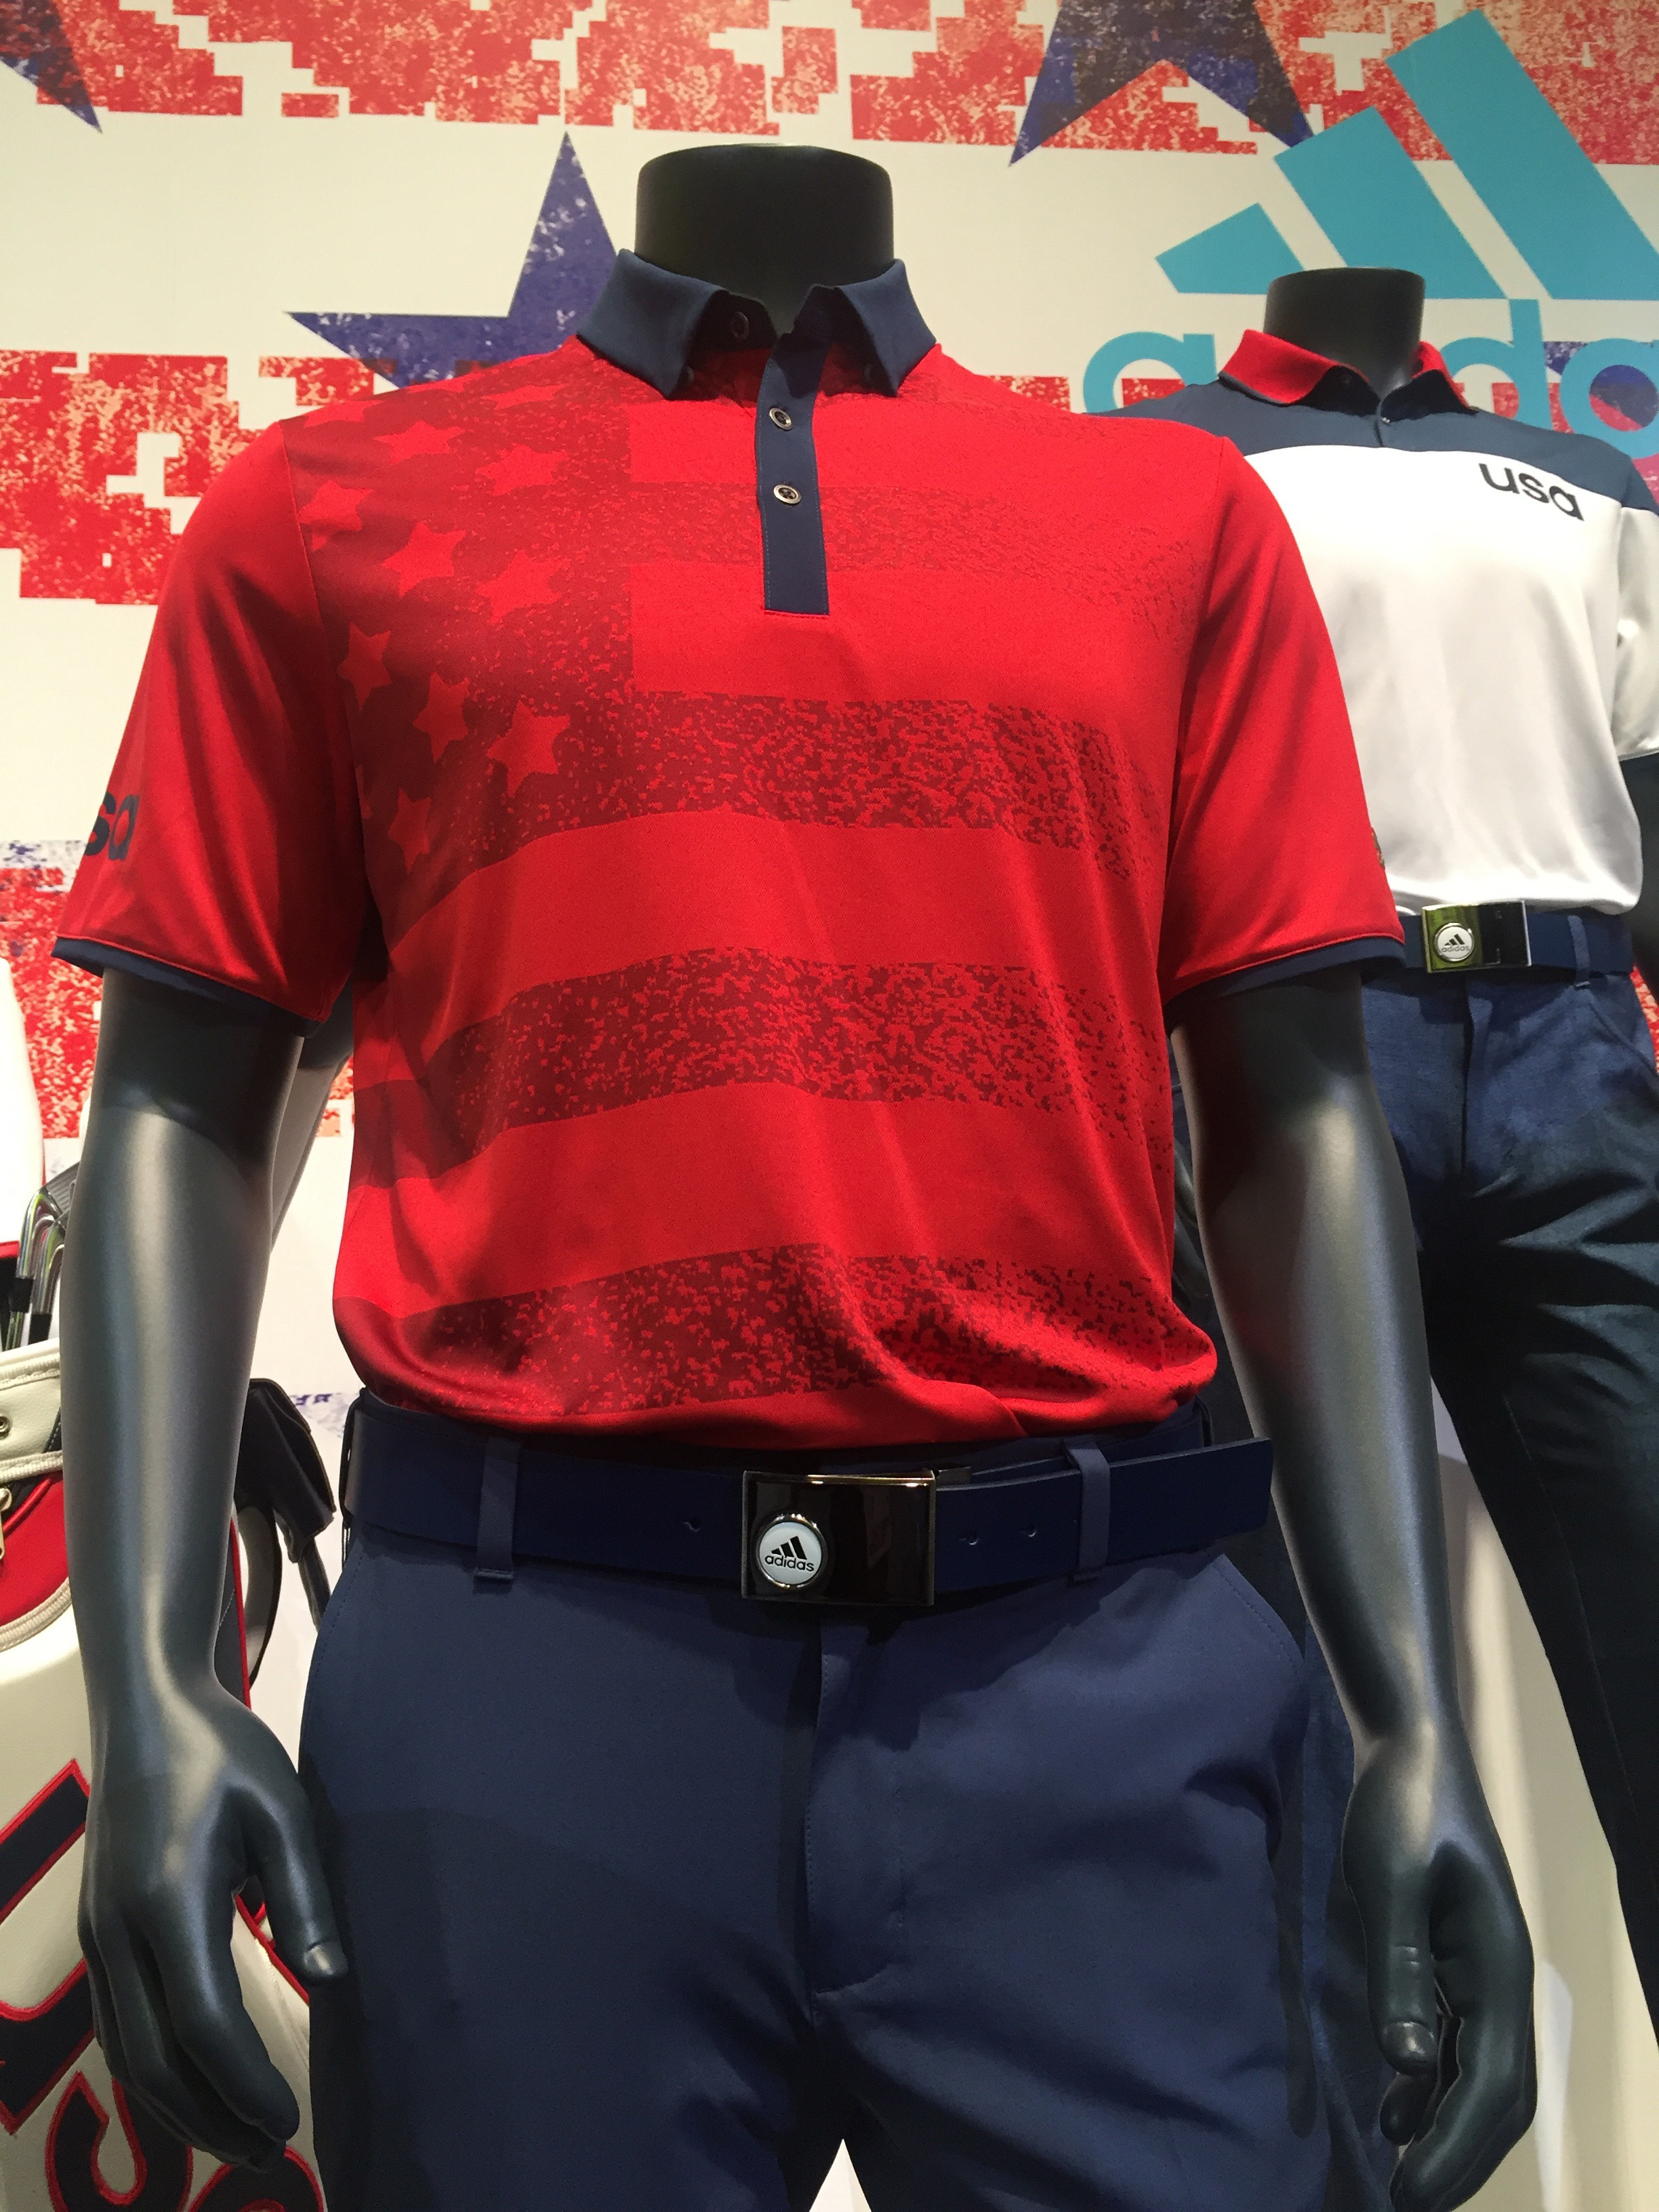 Adidas Golf unveils the Olympic apparel to be by U.S. golfers this in Rio | This is the Loop Golf